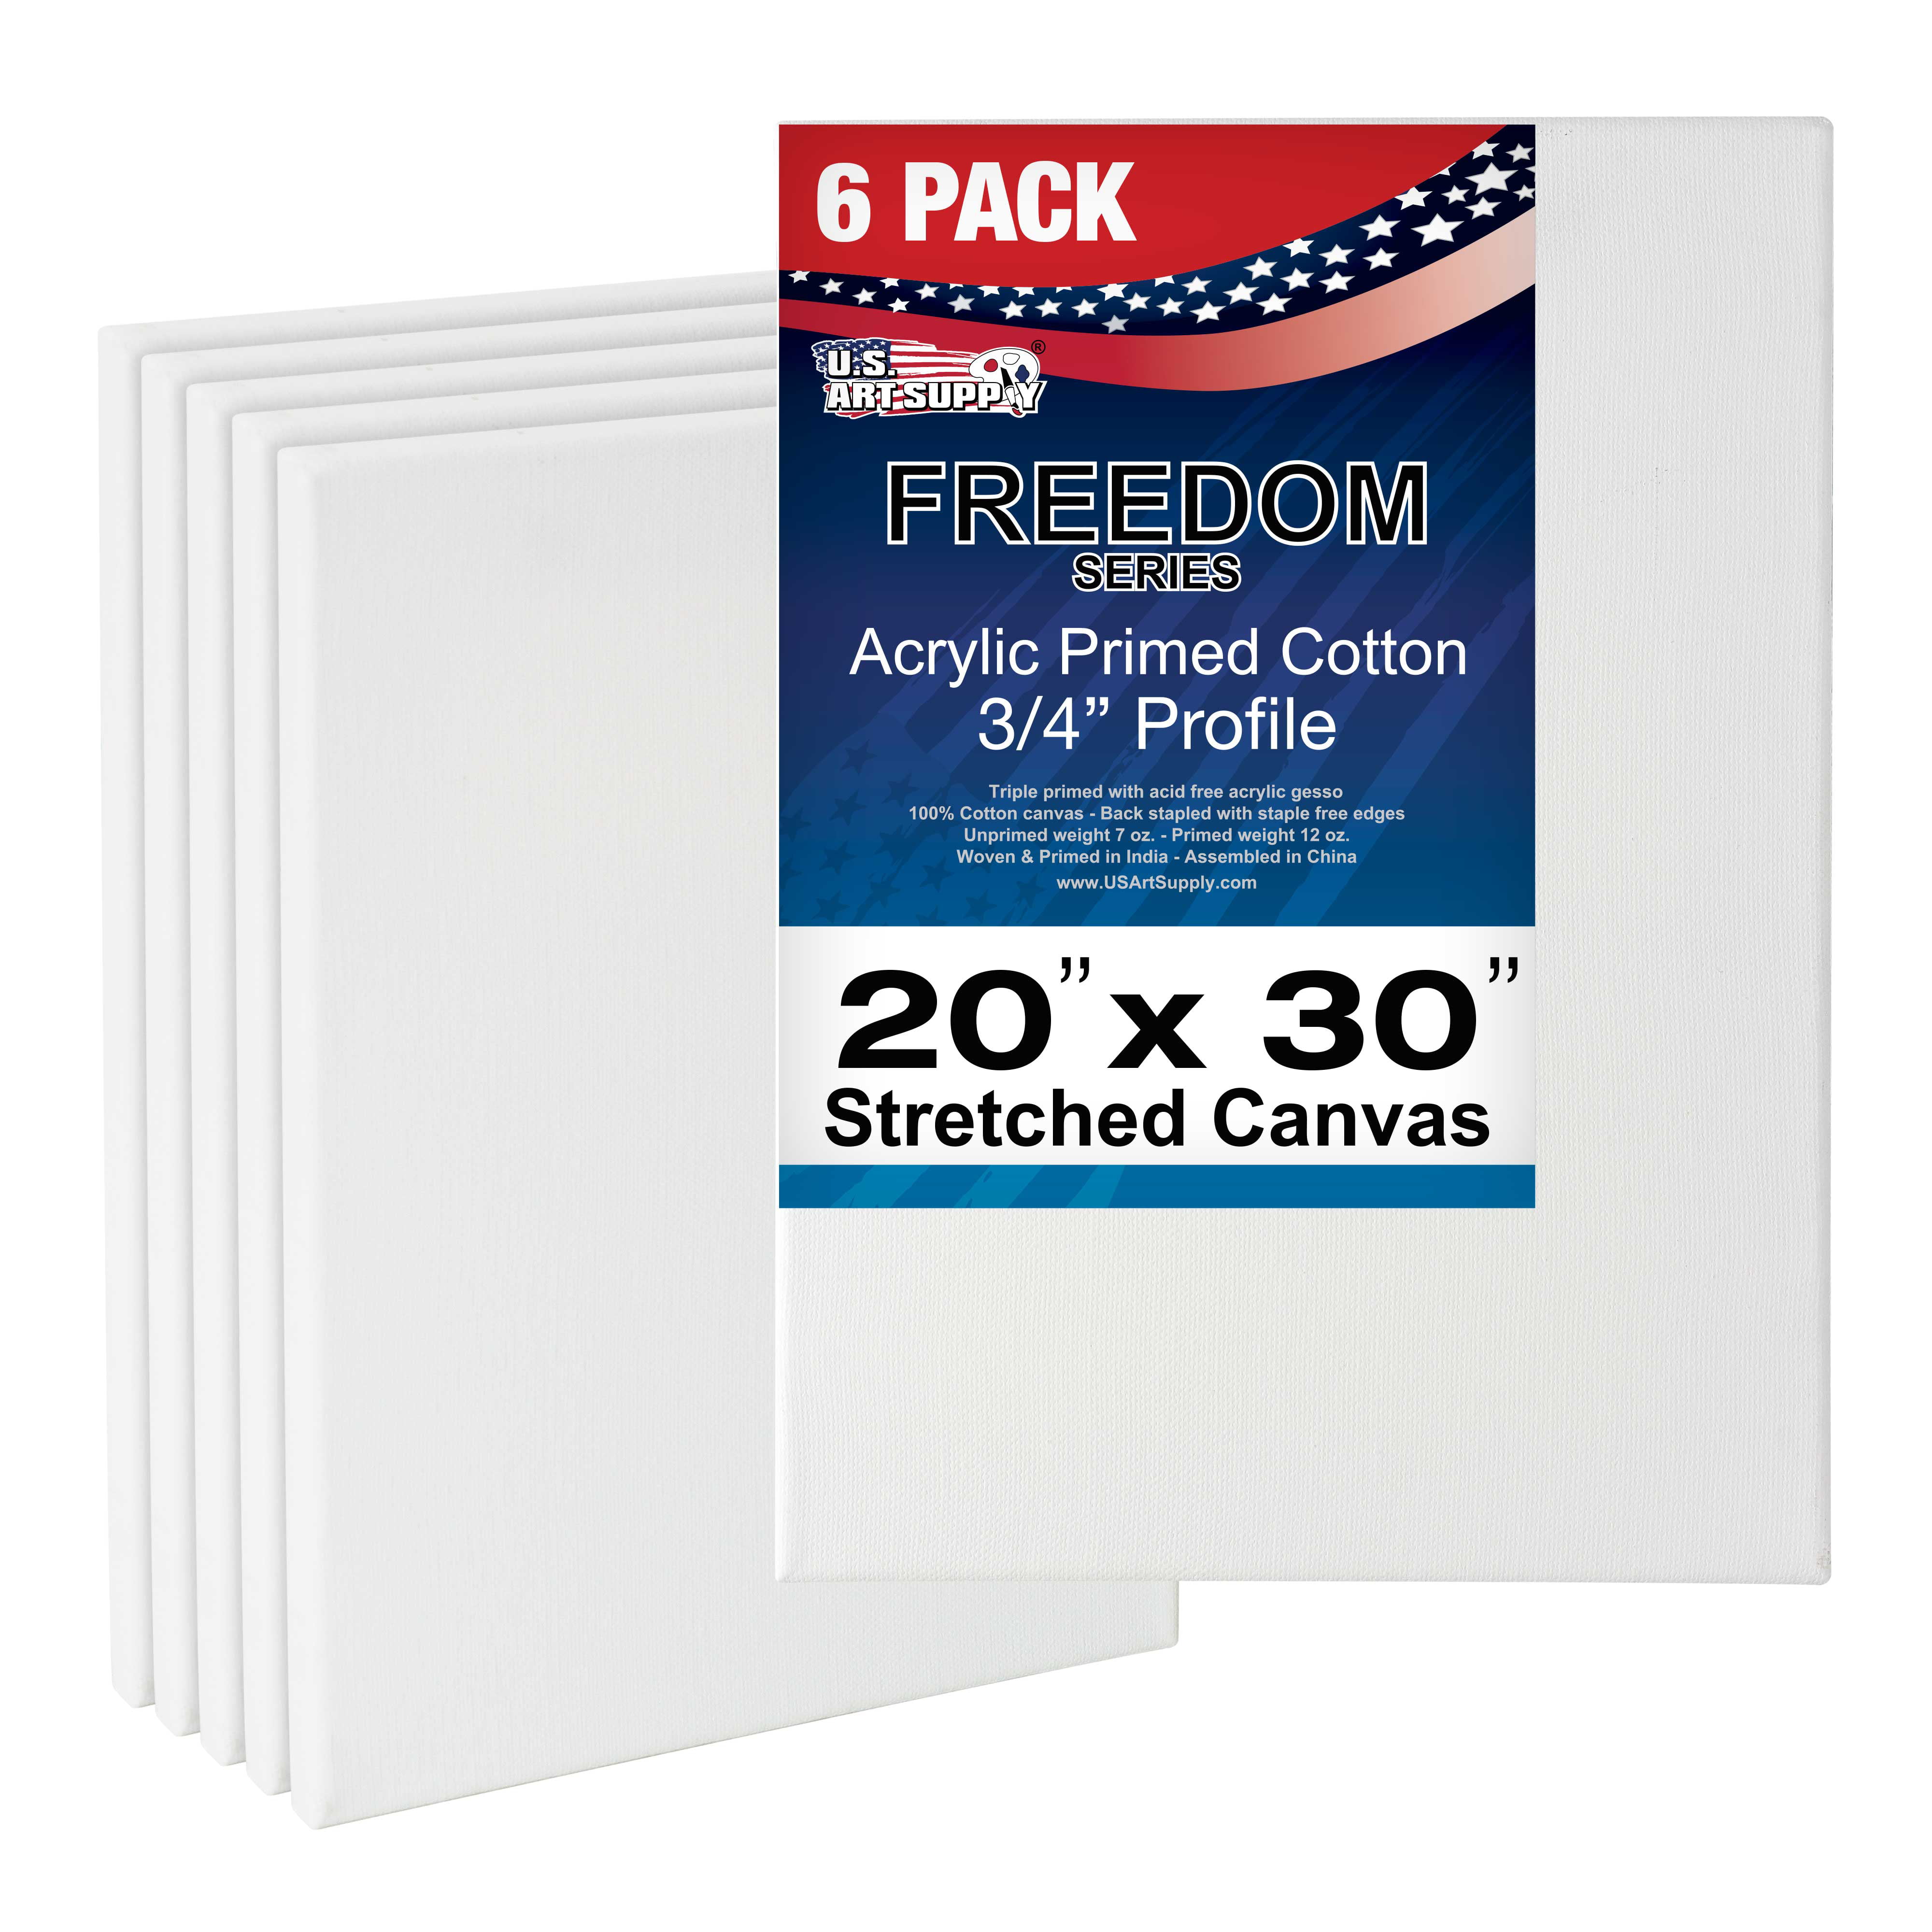 12x12 Inch Art Supplies for Painting and Oil Paint 7 Pack of Triple Primed Blank White Artists Canvases Value Set Pre Stretched Cotton Canvas Acrylics 